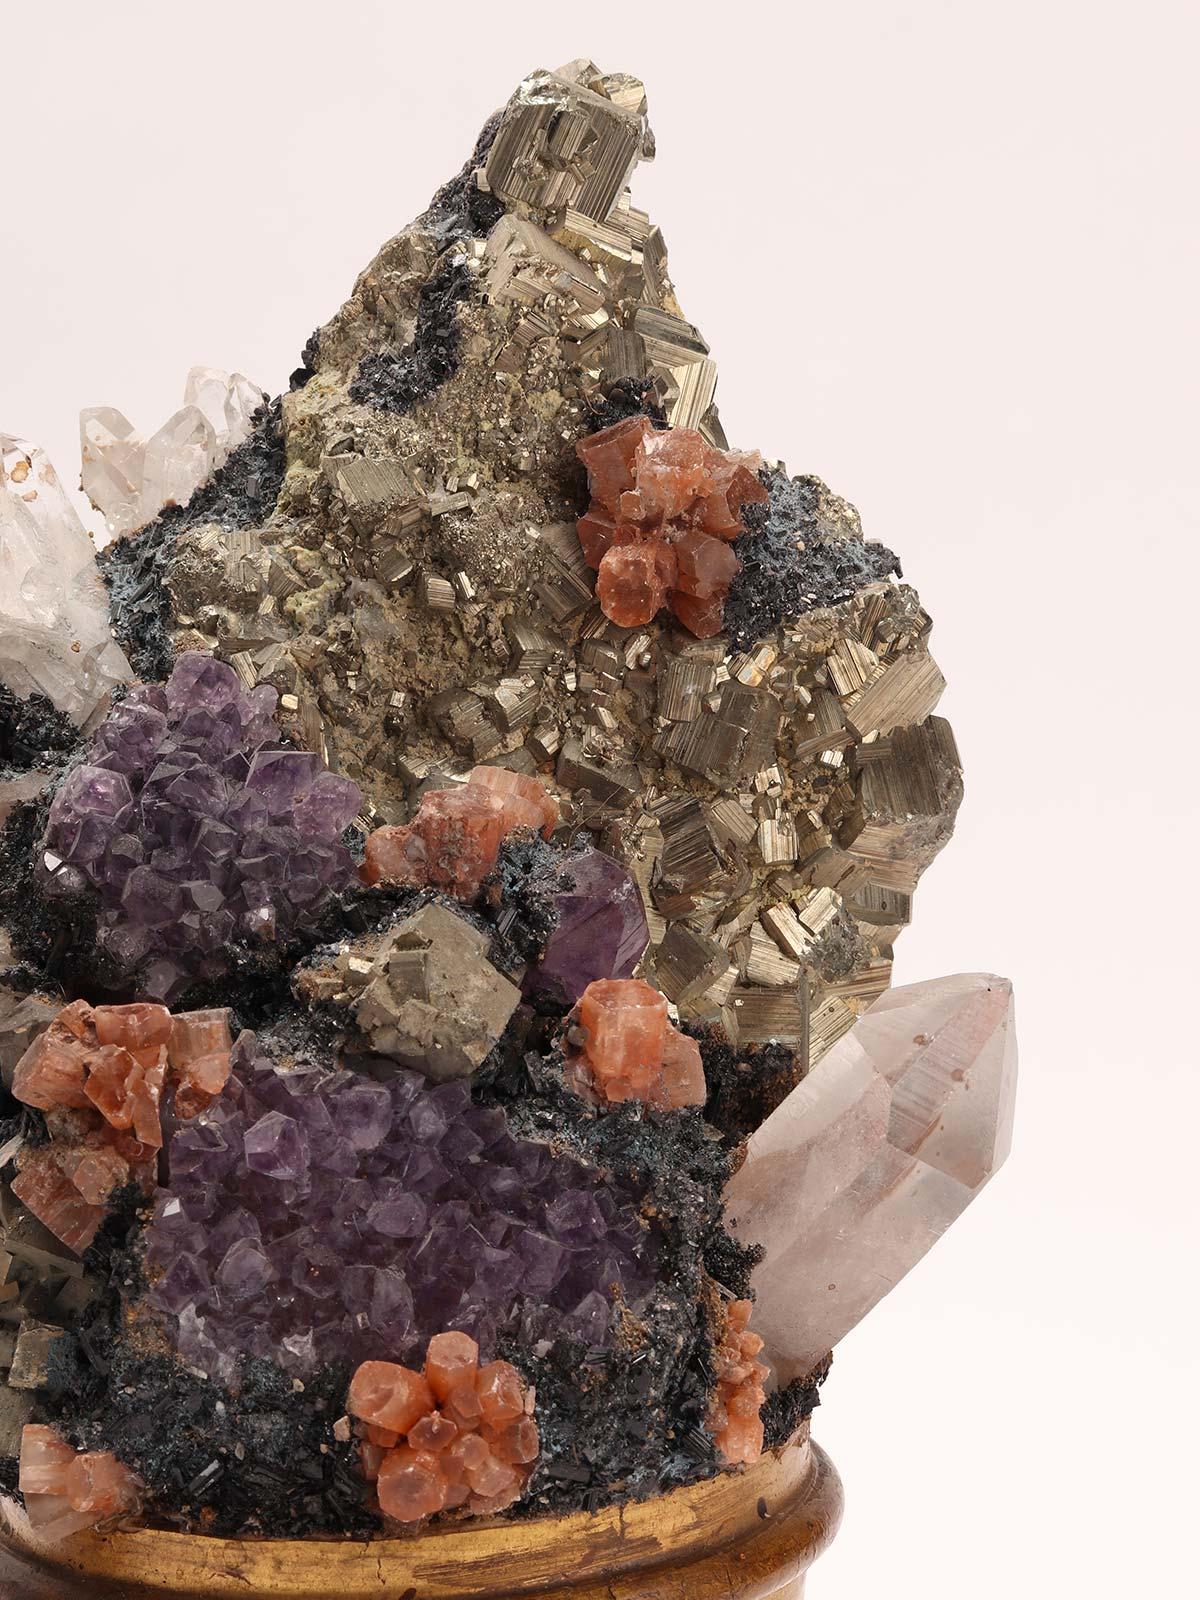 19th Century Pair of Rock Crystals, Amethyste, Pyrite and Aragonite Druzes, Italy 1880 For Sale